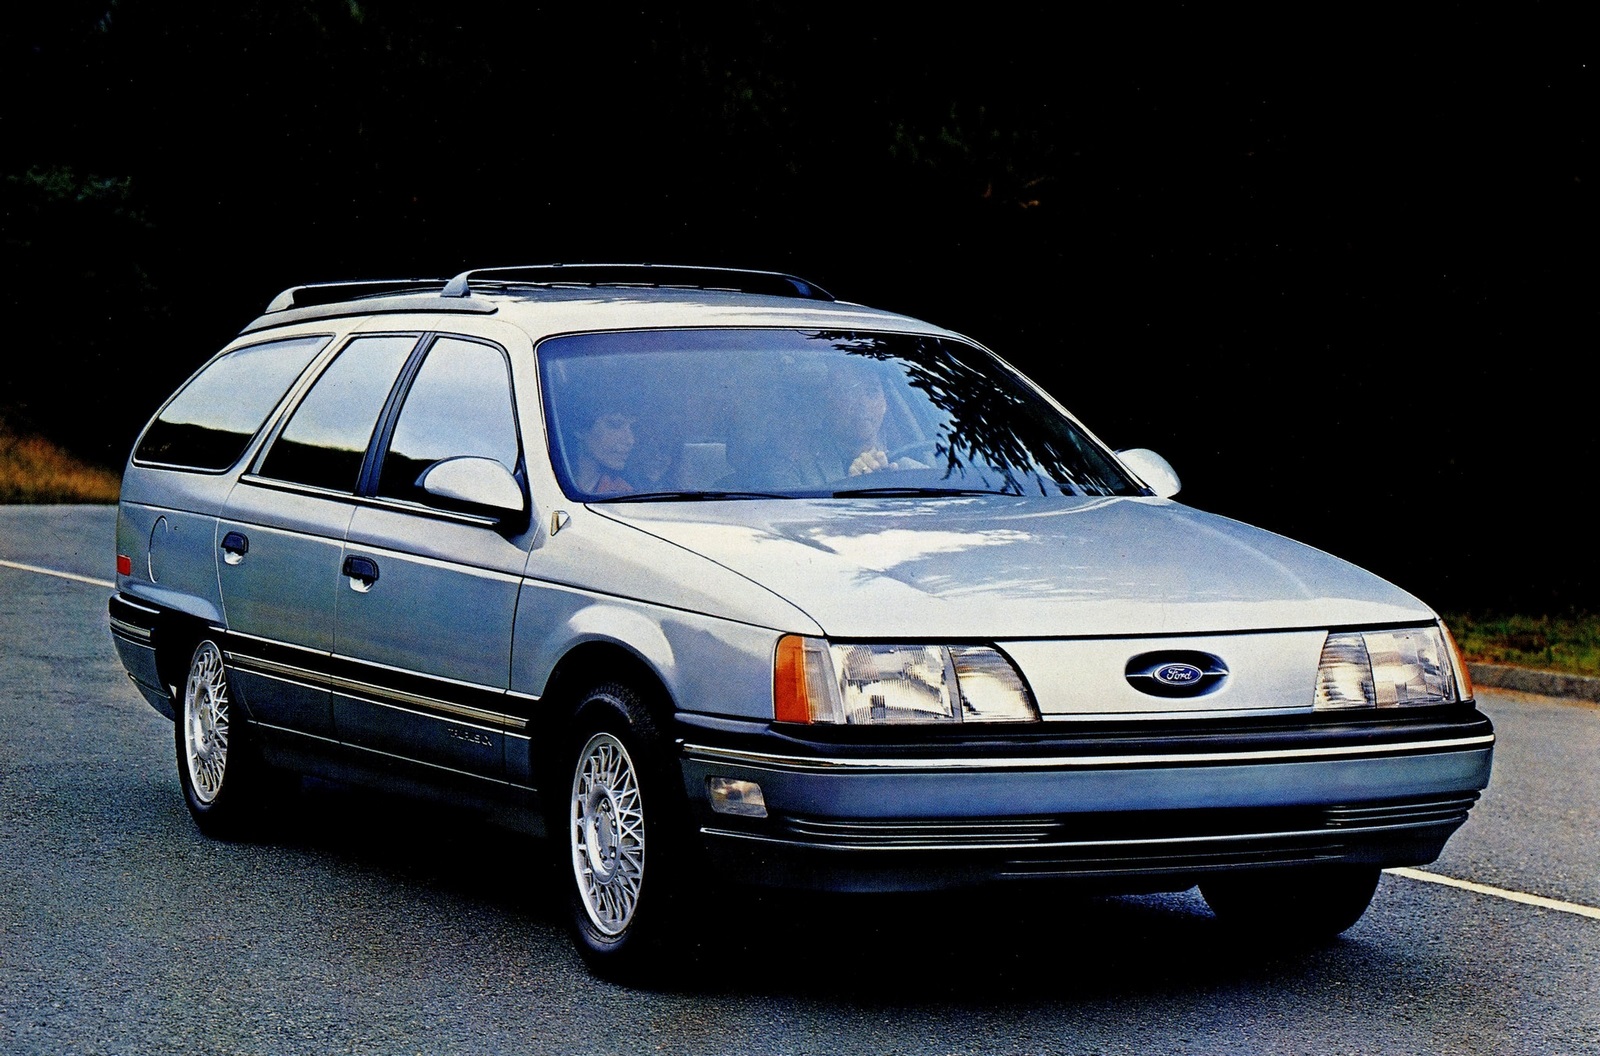 <p>Ford’s fortunes looked boundless in the late 1980s. It raked in <strong>$53 billion</strong> in net revenue in 1988 (more than General Motors) and it sold <strong>1,535,145</strong> cars and trucks during the model year (slightly more than rival Chevrolet). America’s best-selling car that year was the Escort (<strong>381,330 units</strong>), followed by the Taurus (<strong>367,327 units</strong>). Honda’s Accord finished third with <strong>362,118 sales</strong>. Ford also ruled the truck chart: <strong>588,452 examples</strong> of the F-Series found a home.</p>